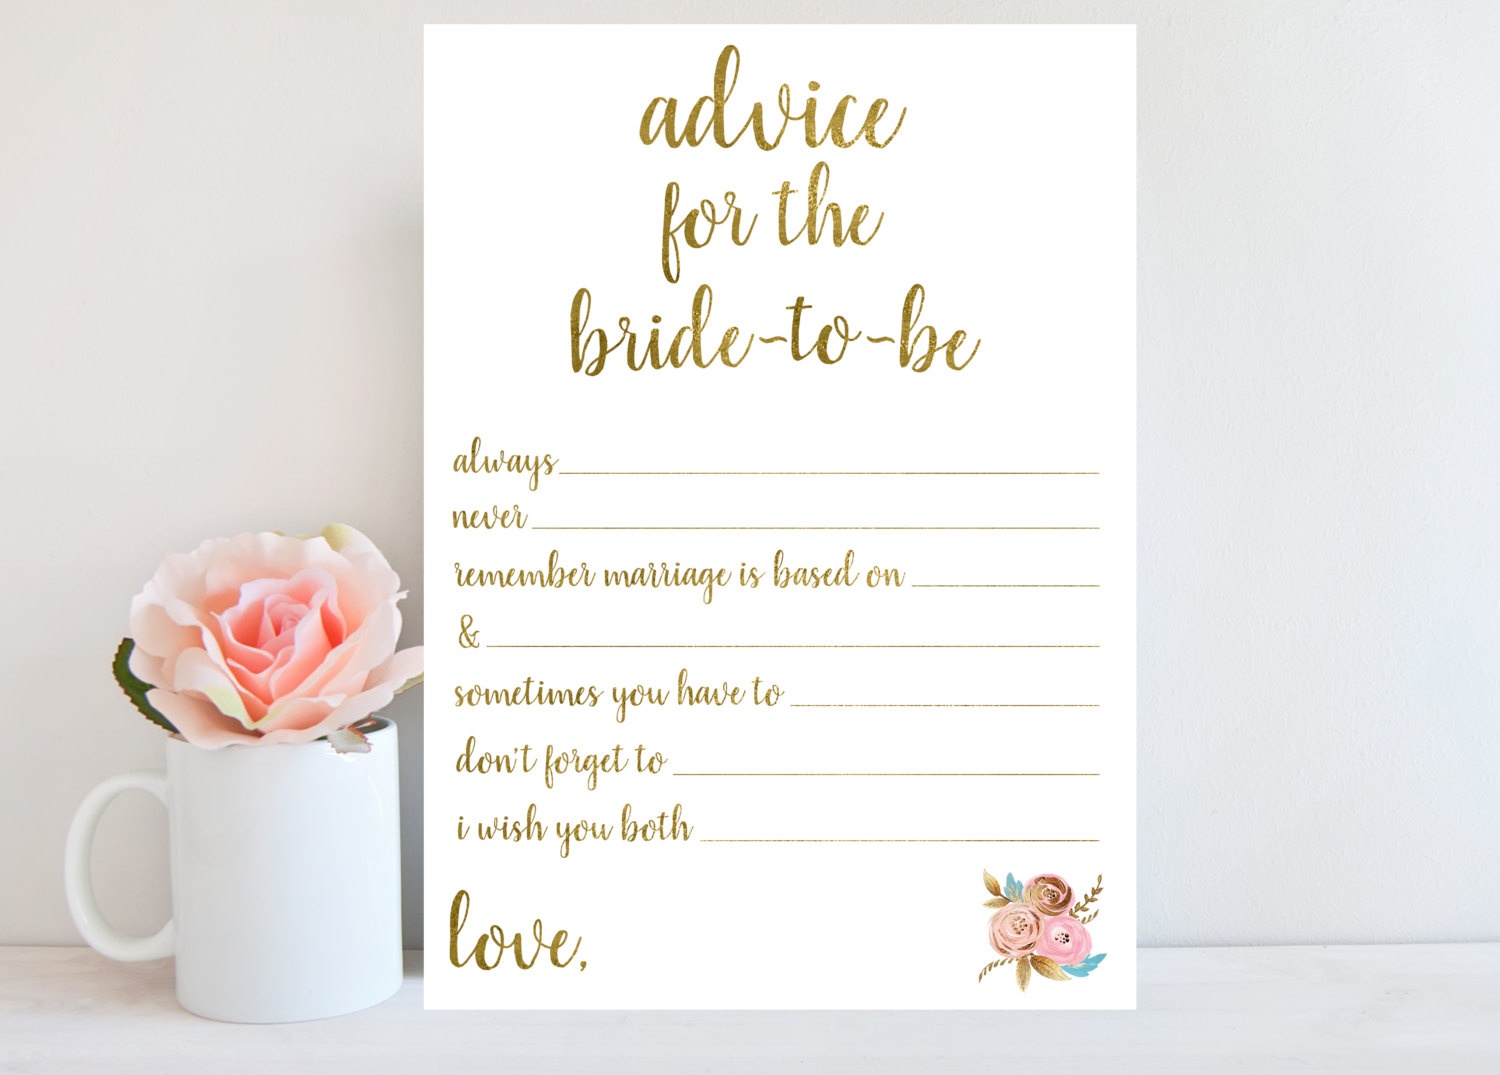 Advice For Bride-To-Be Bridal Shower Advice Cards Printable | Etsy - Free Printable Bridal Shower Advice Cards